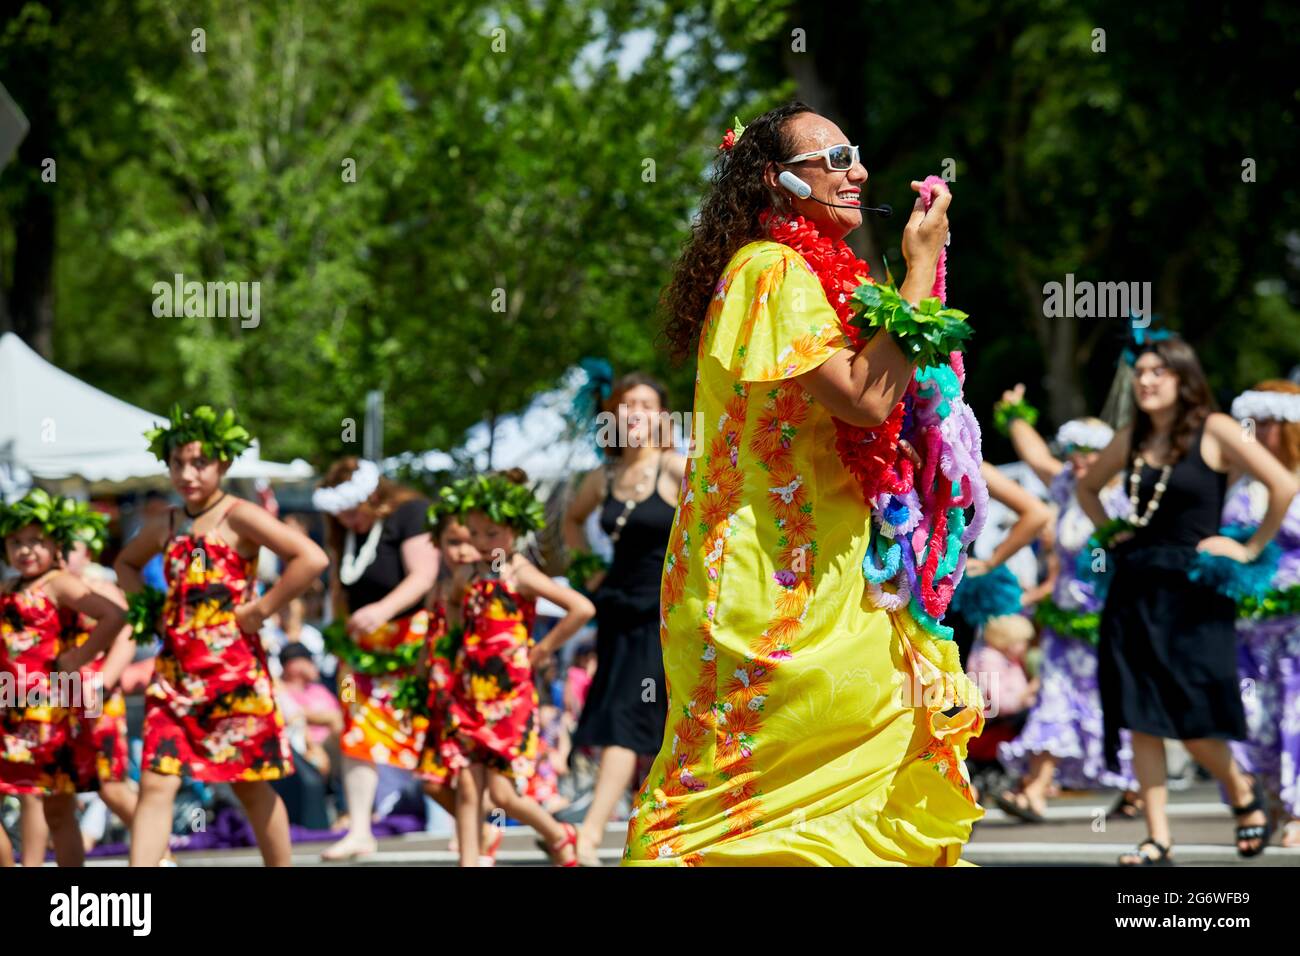 Prescott, Arizona, USA - July 3, 2021: Polynesian hula dancer giving out leis while marching in 4th of July parade Stock Photo